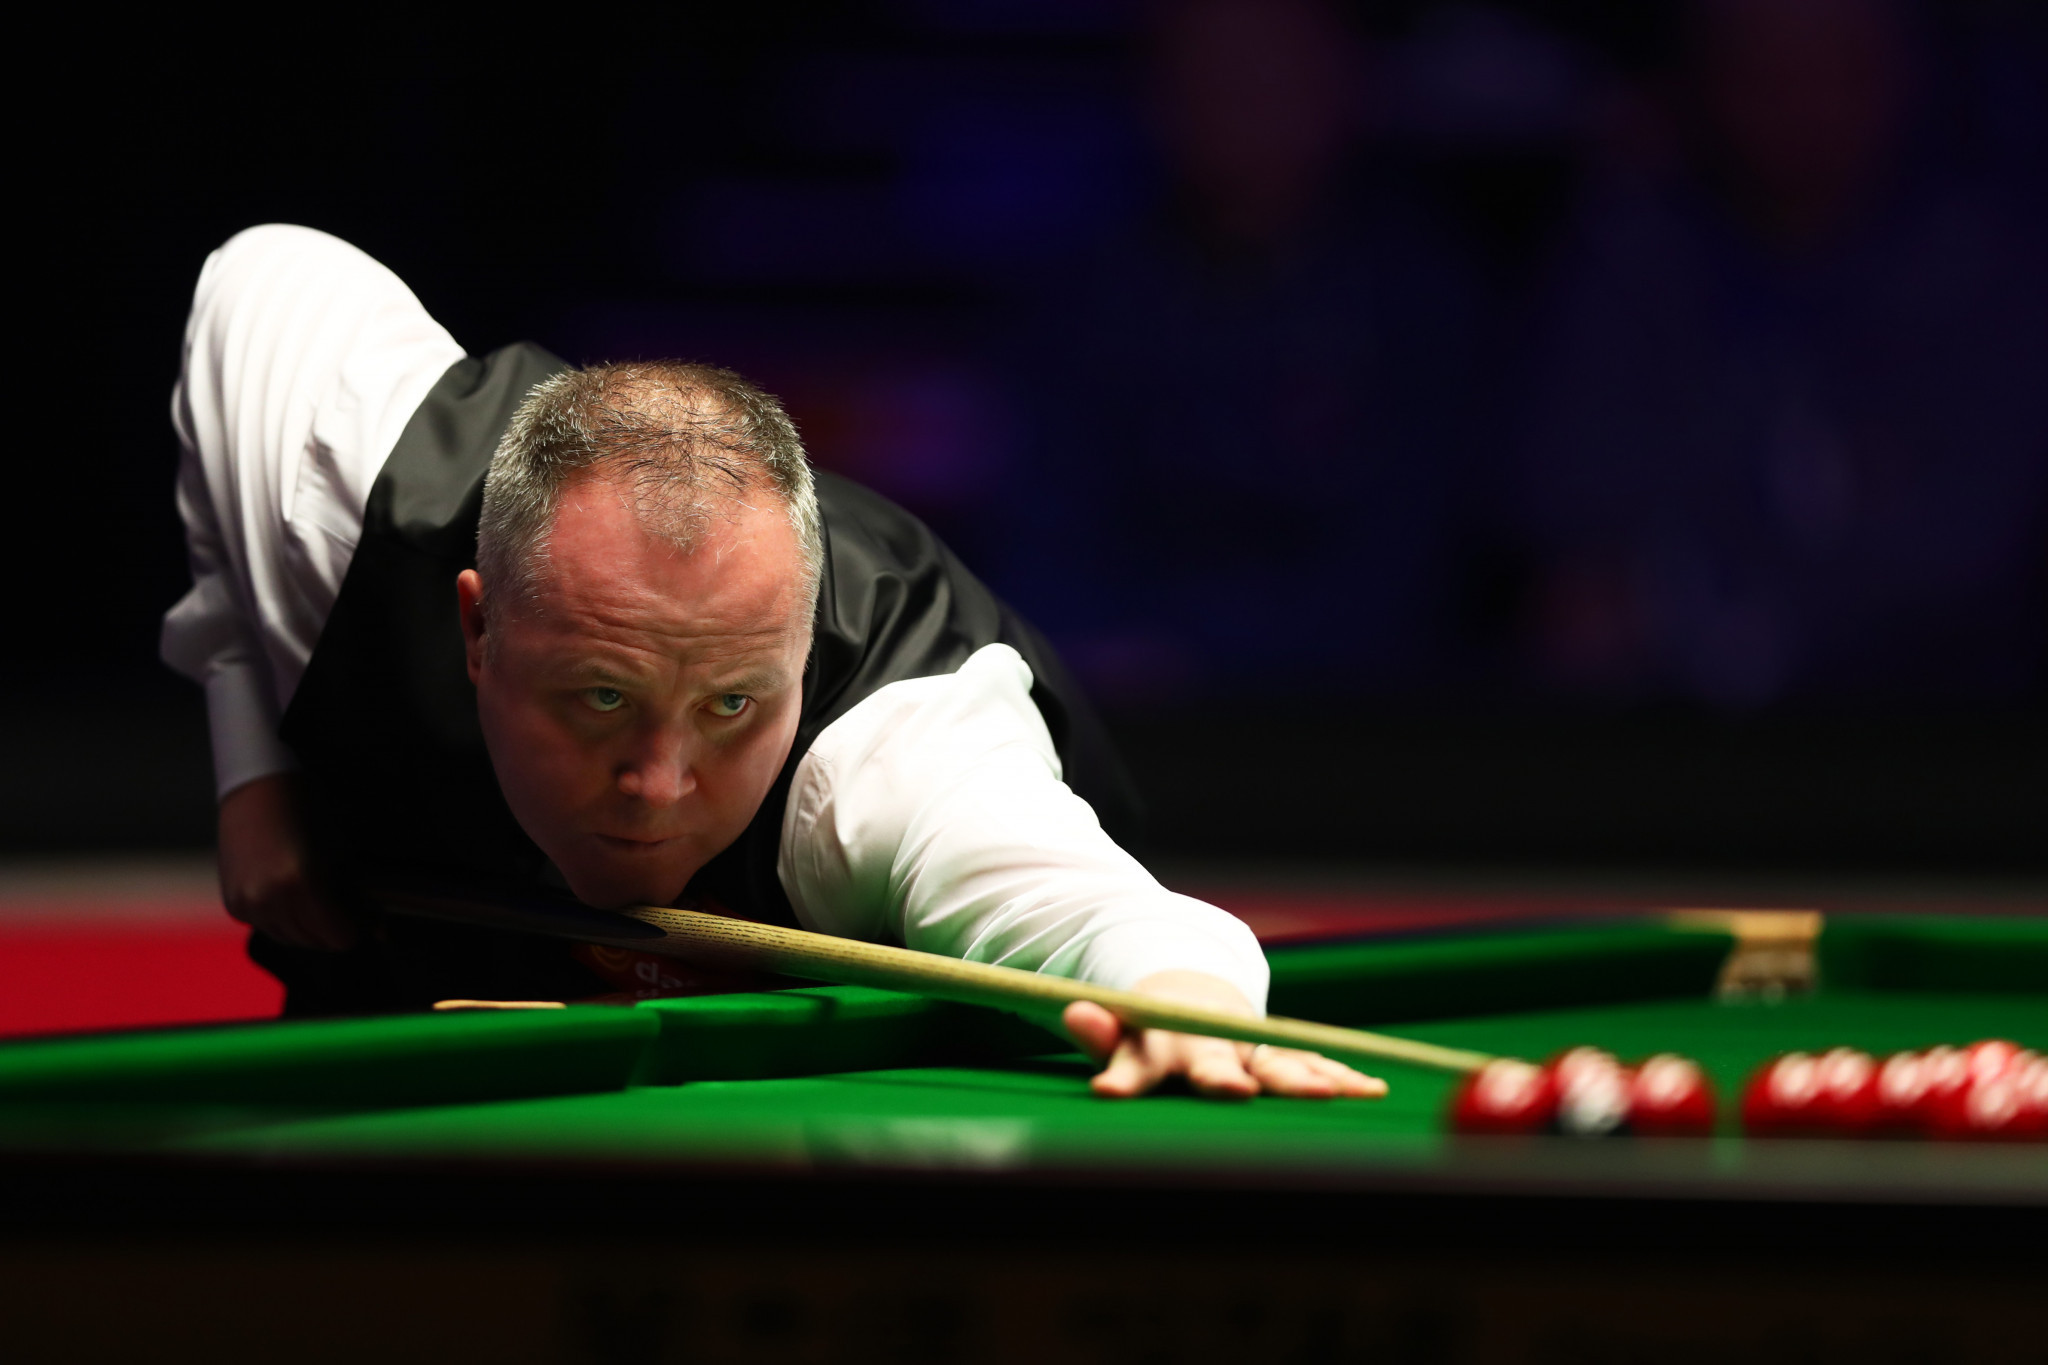 Four-time champion John Higgins is through to the second round ©Getty Images